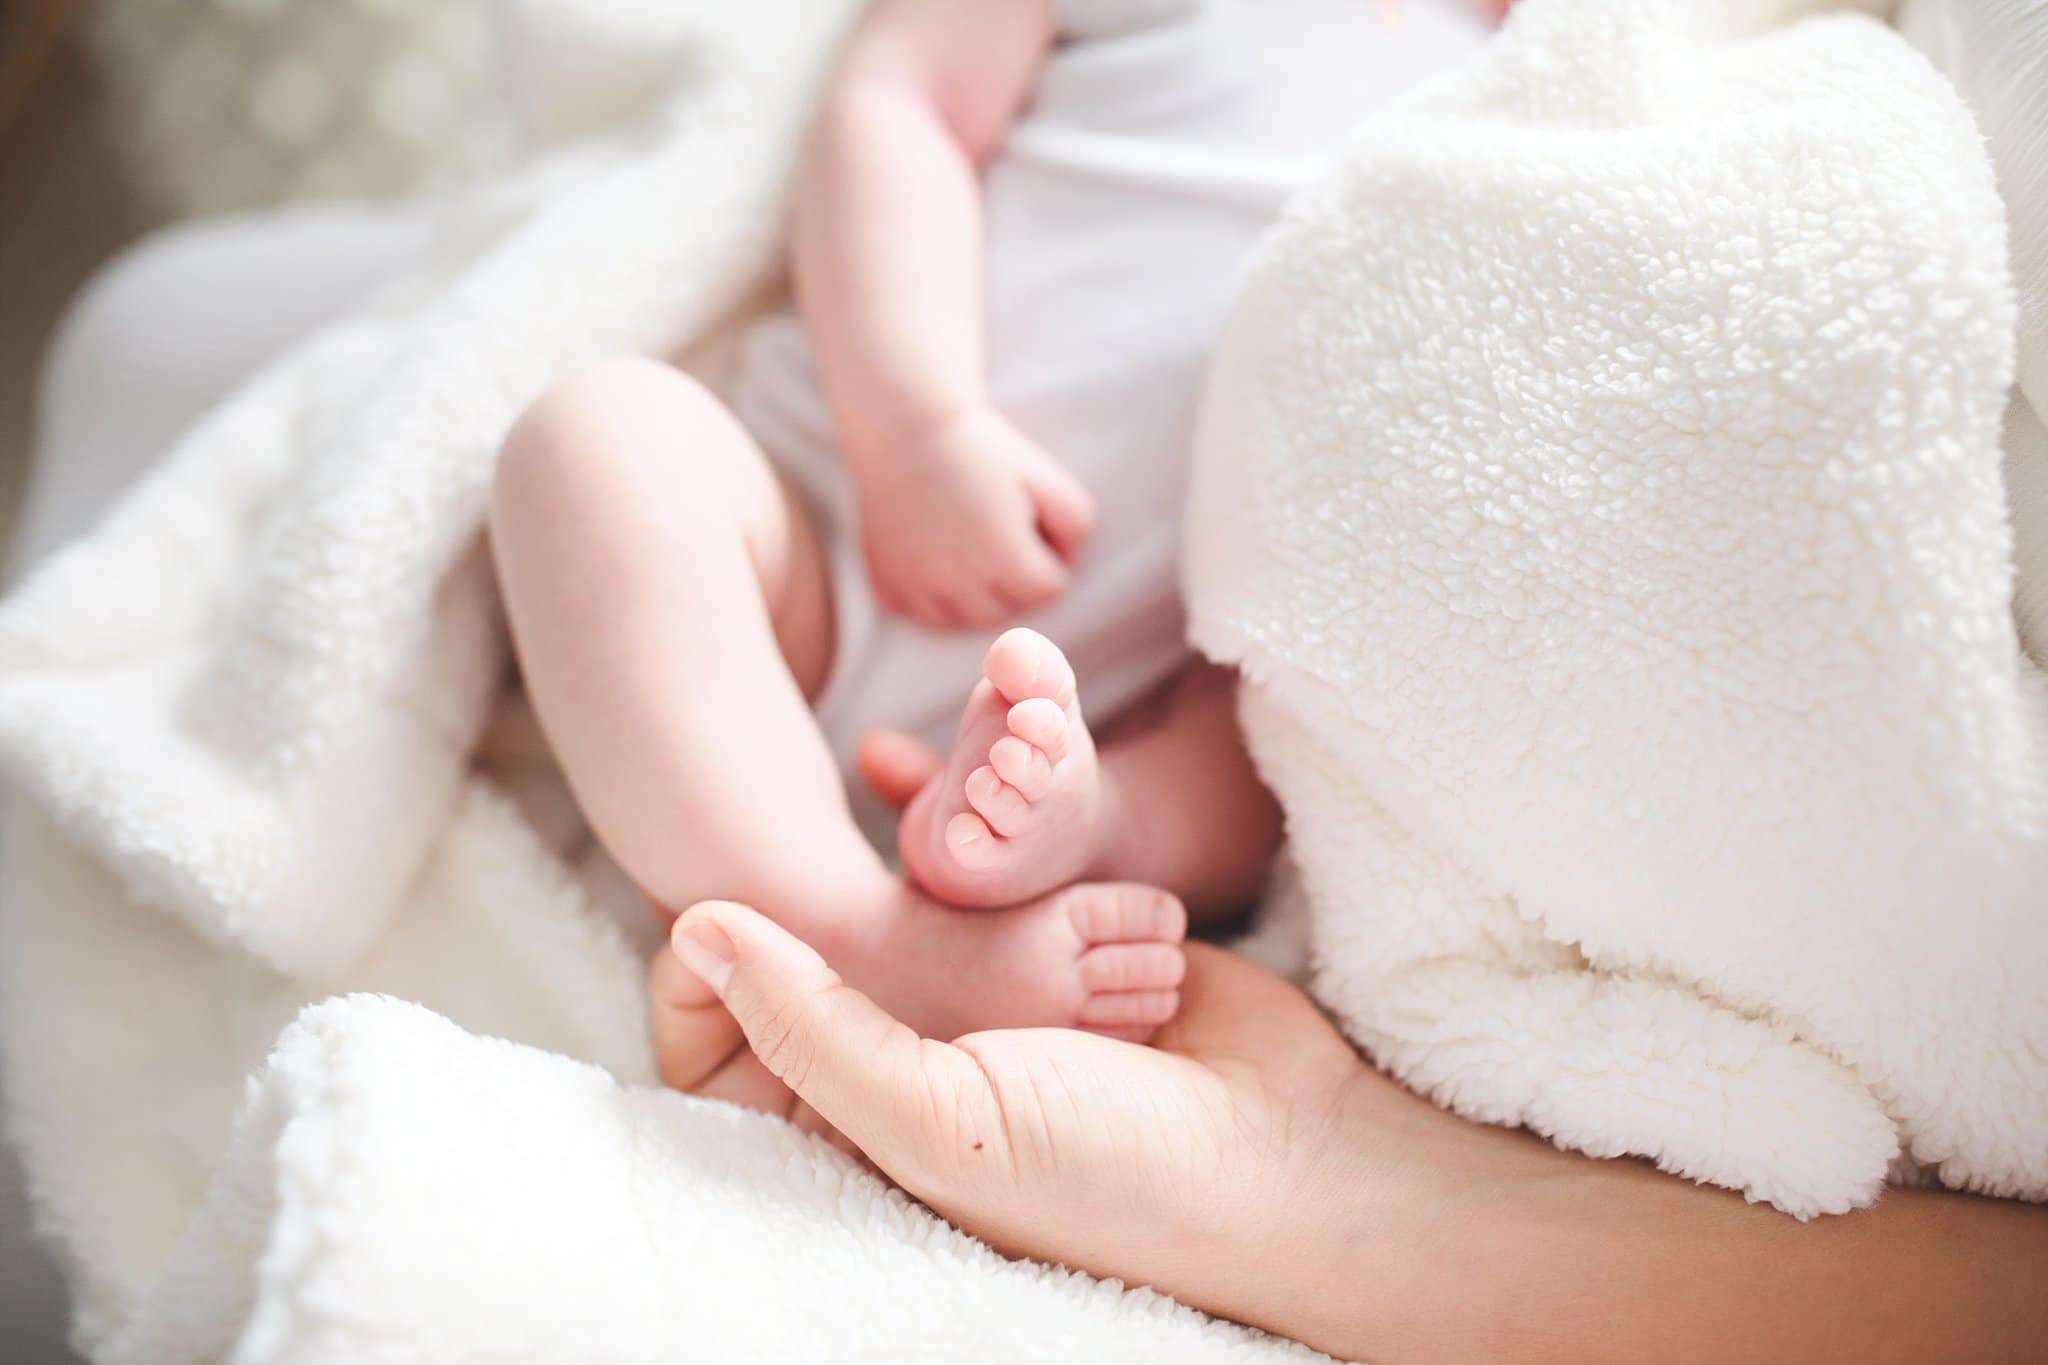 In Home Newborn Photography newborn baby toes in mom's hands surrounded by white